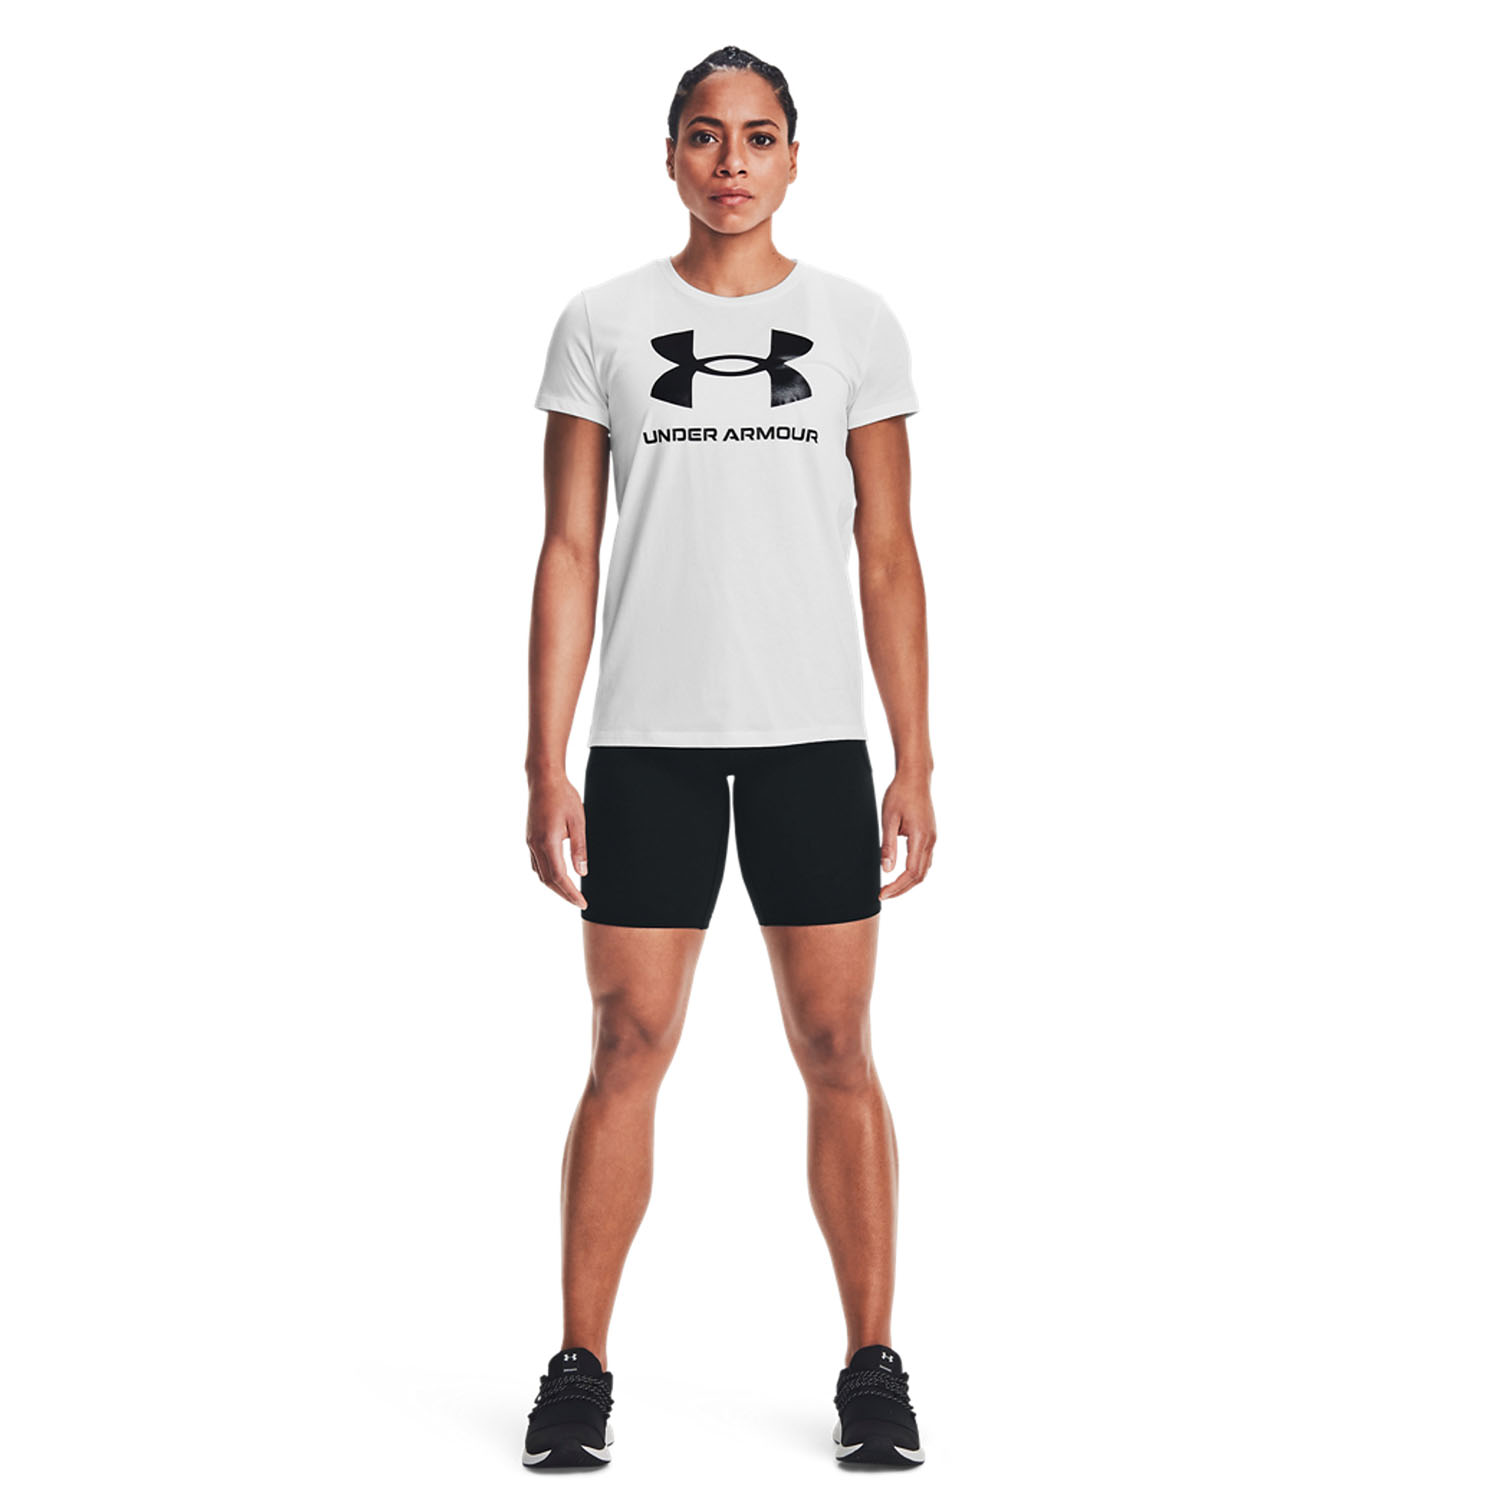 Under Armour Sportstyle Graphic T-Shirt - White/Black